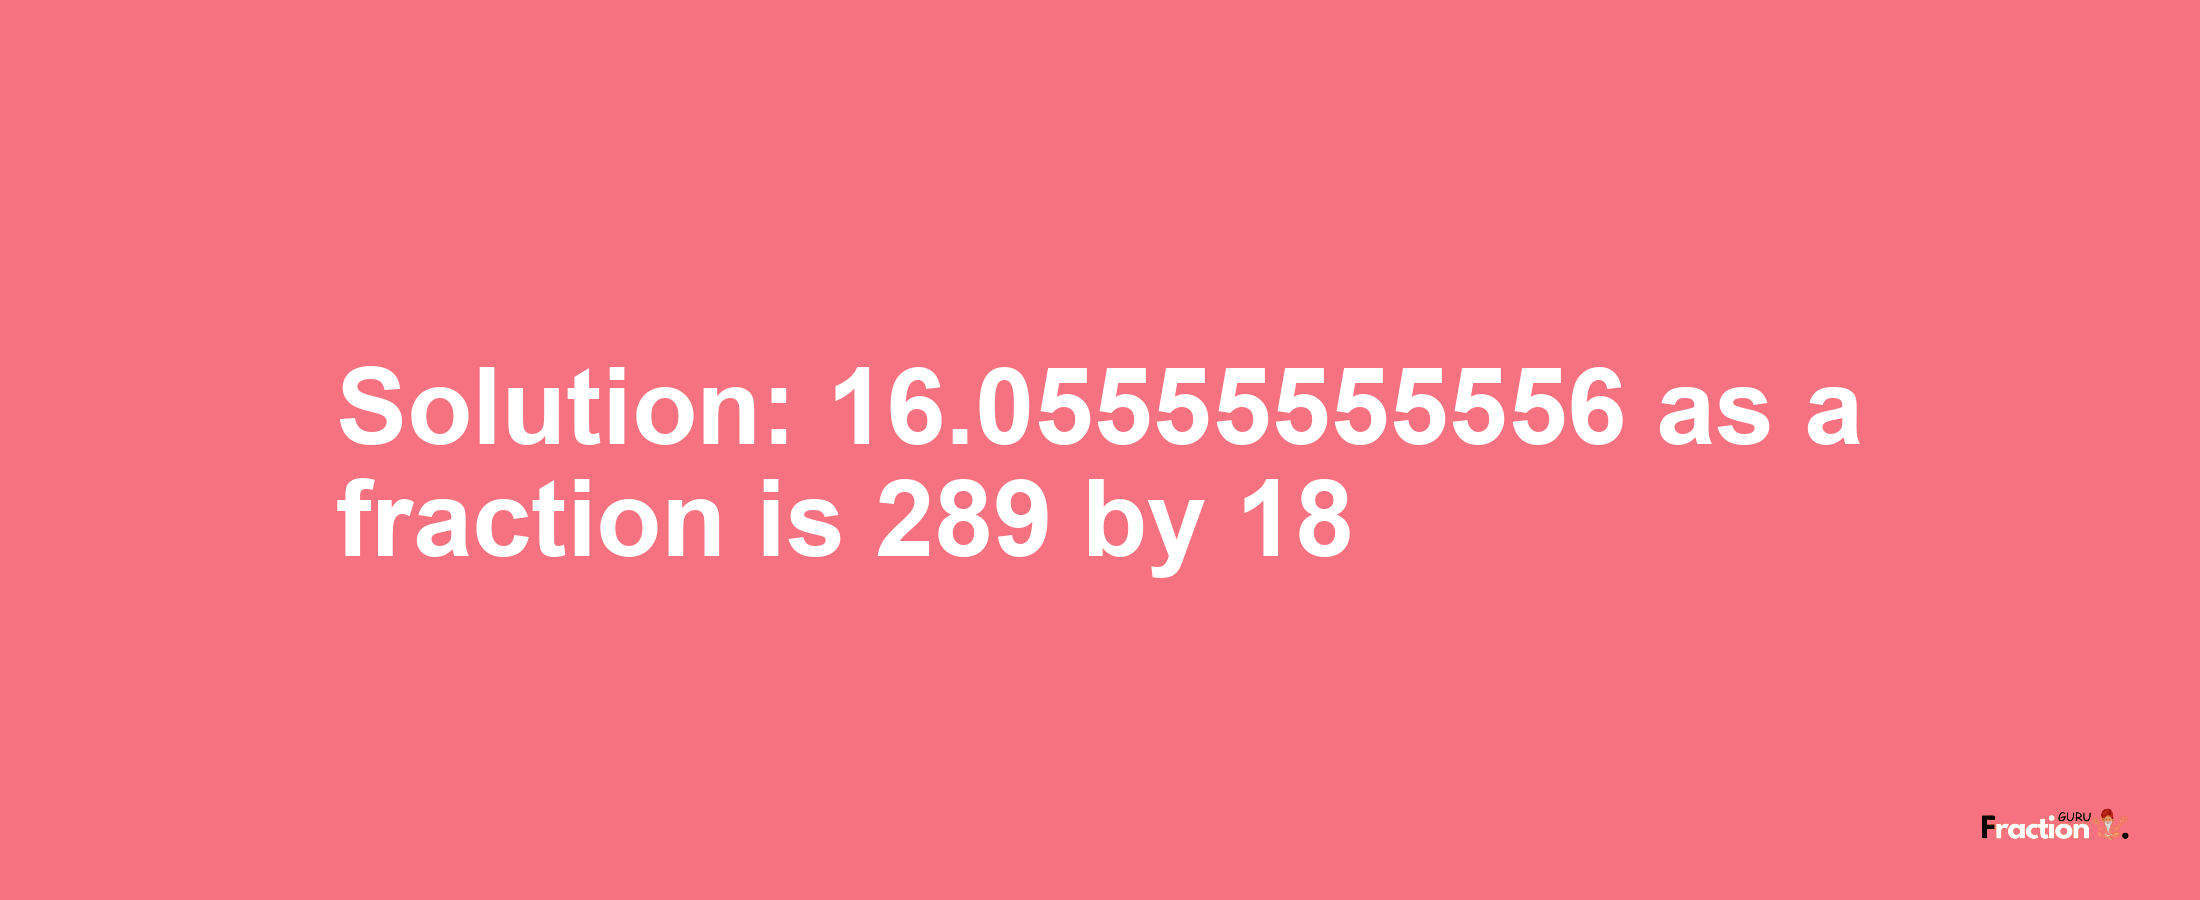 Solution:16.05555555556 as a fraction is 289/18